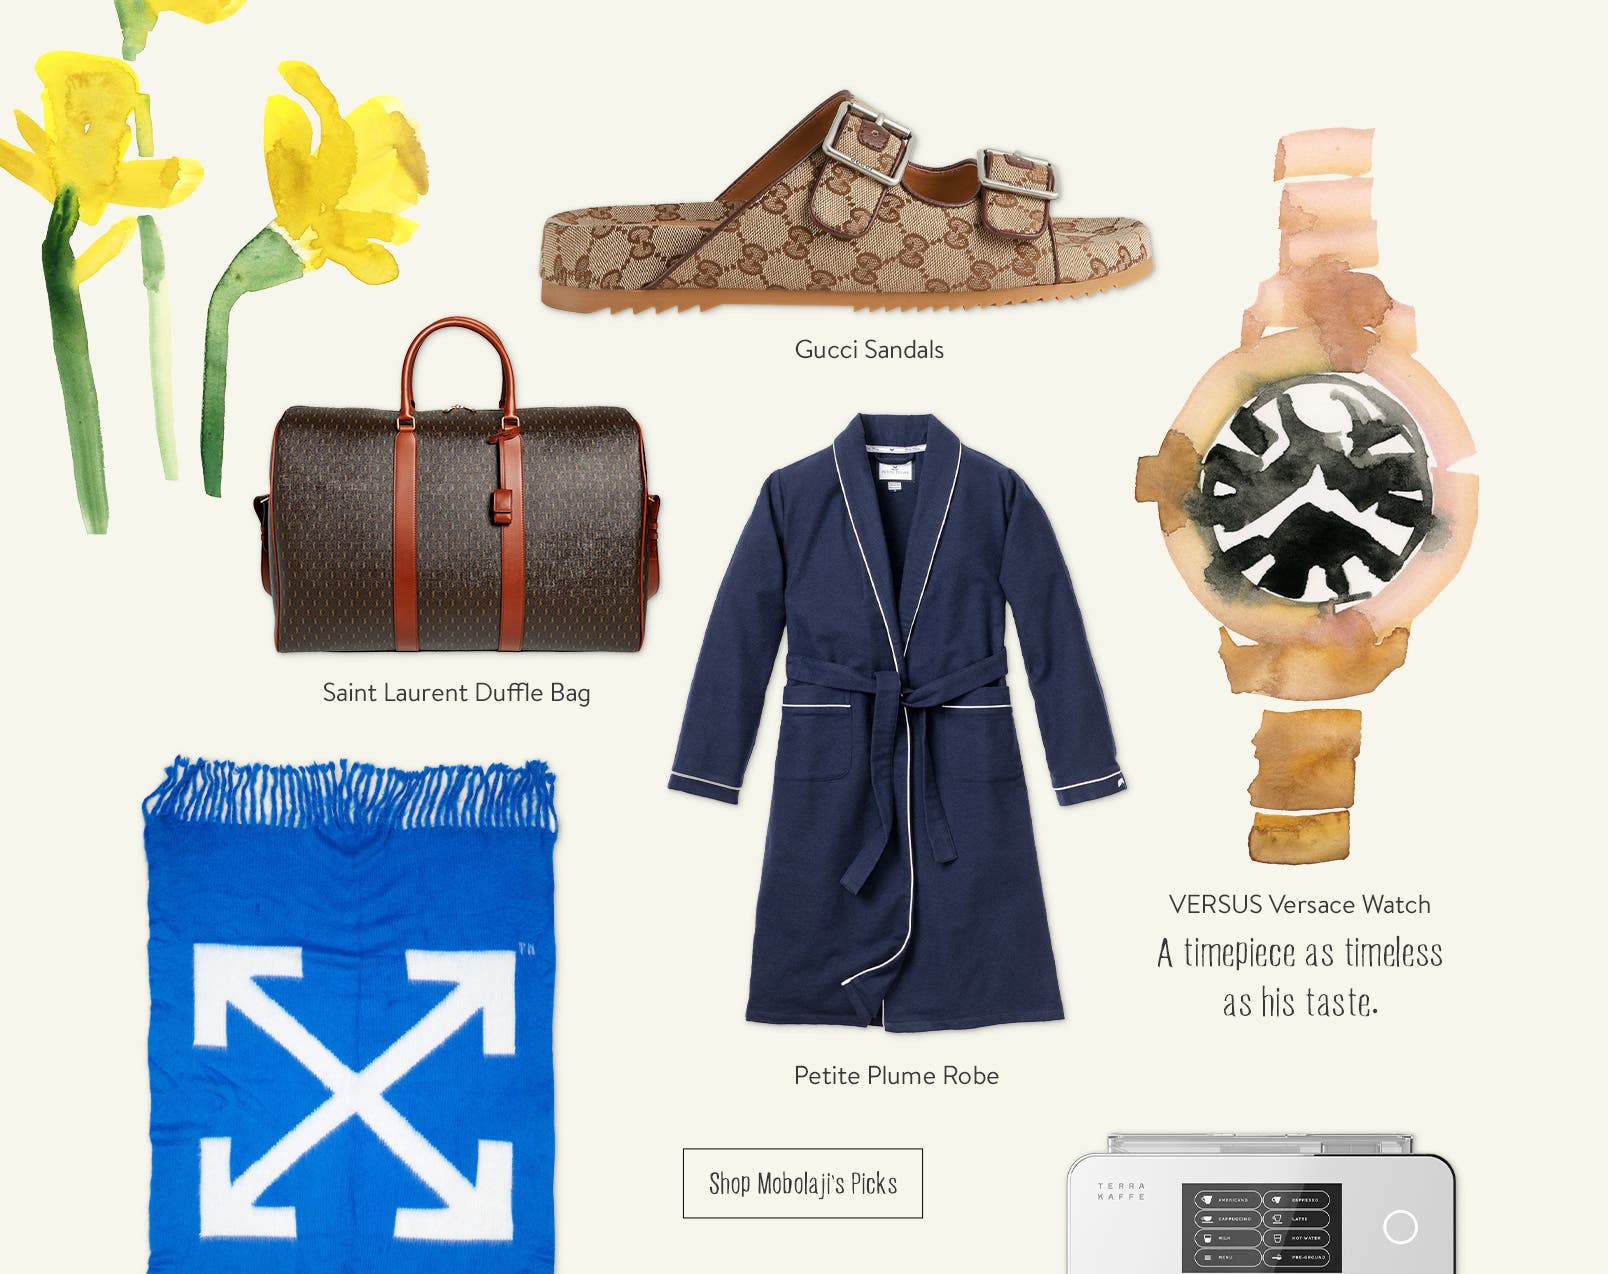 Father's Day gift picks, including clothing, shoes and accessories.